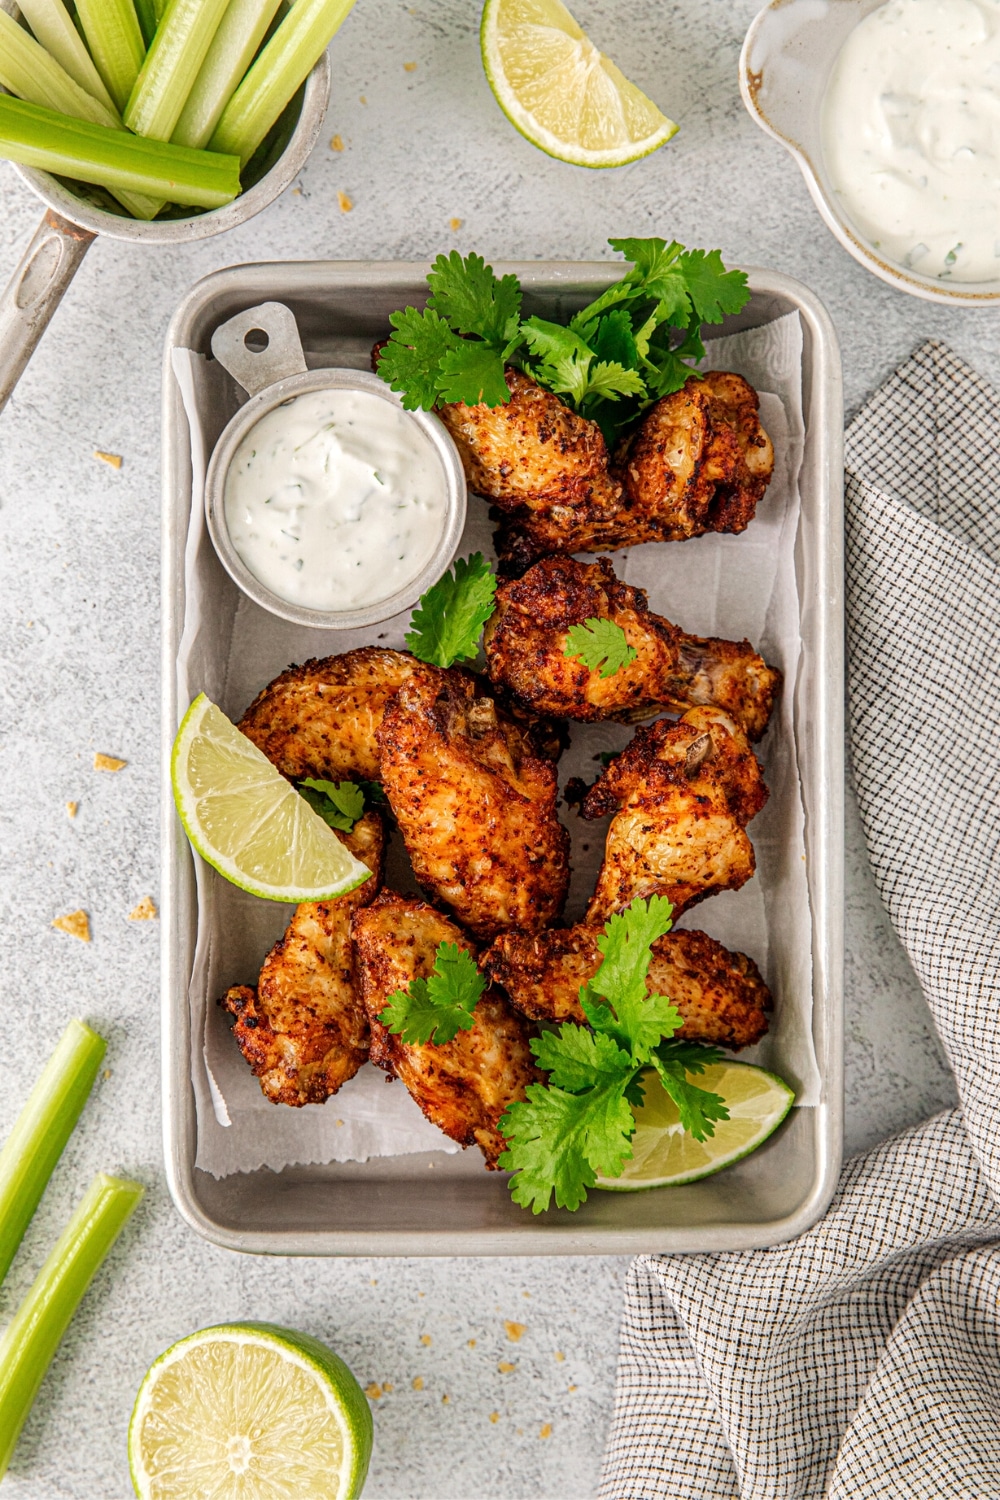 Tequila lime wings on a serving tray with creamy tequila-lime dipping sauce.